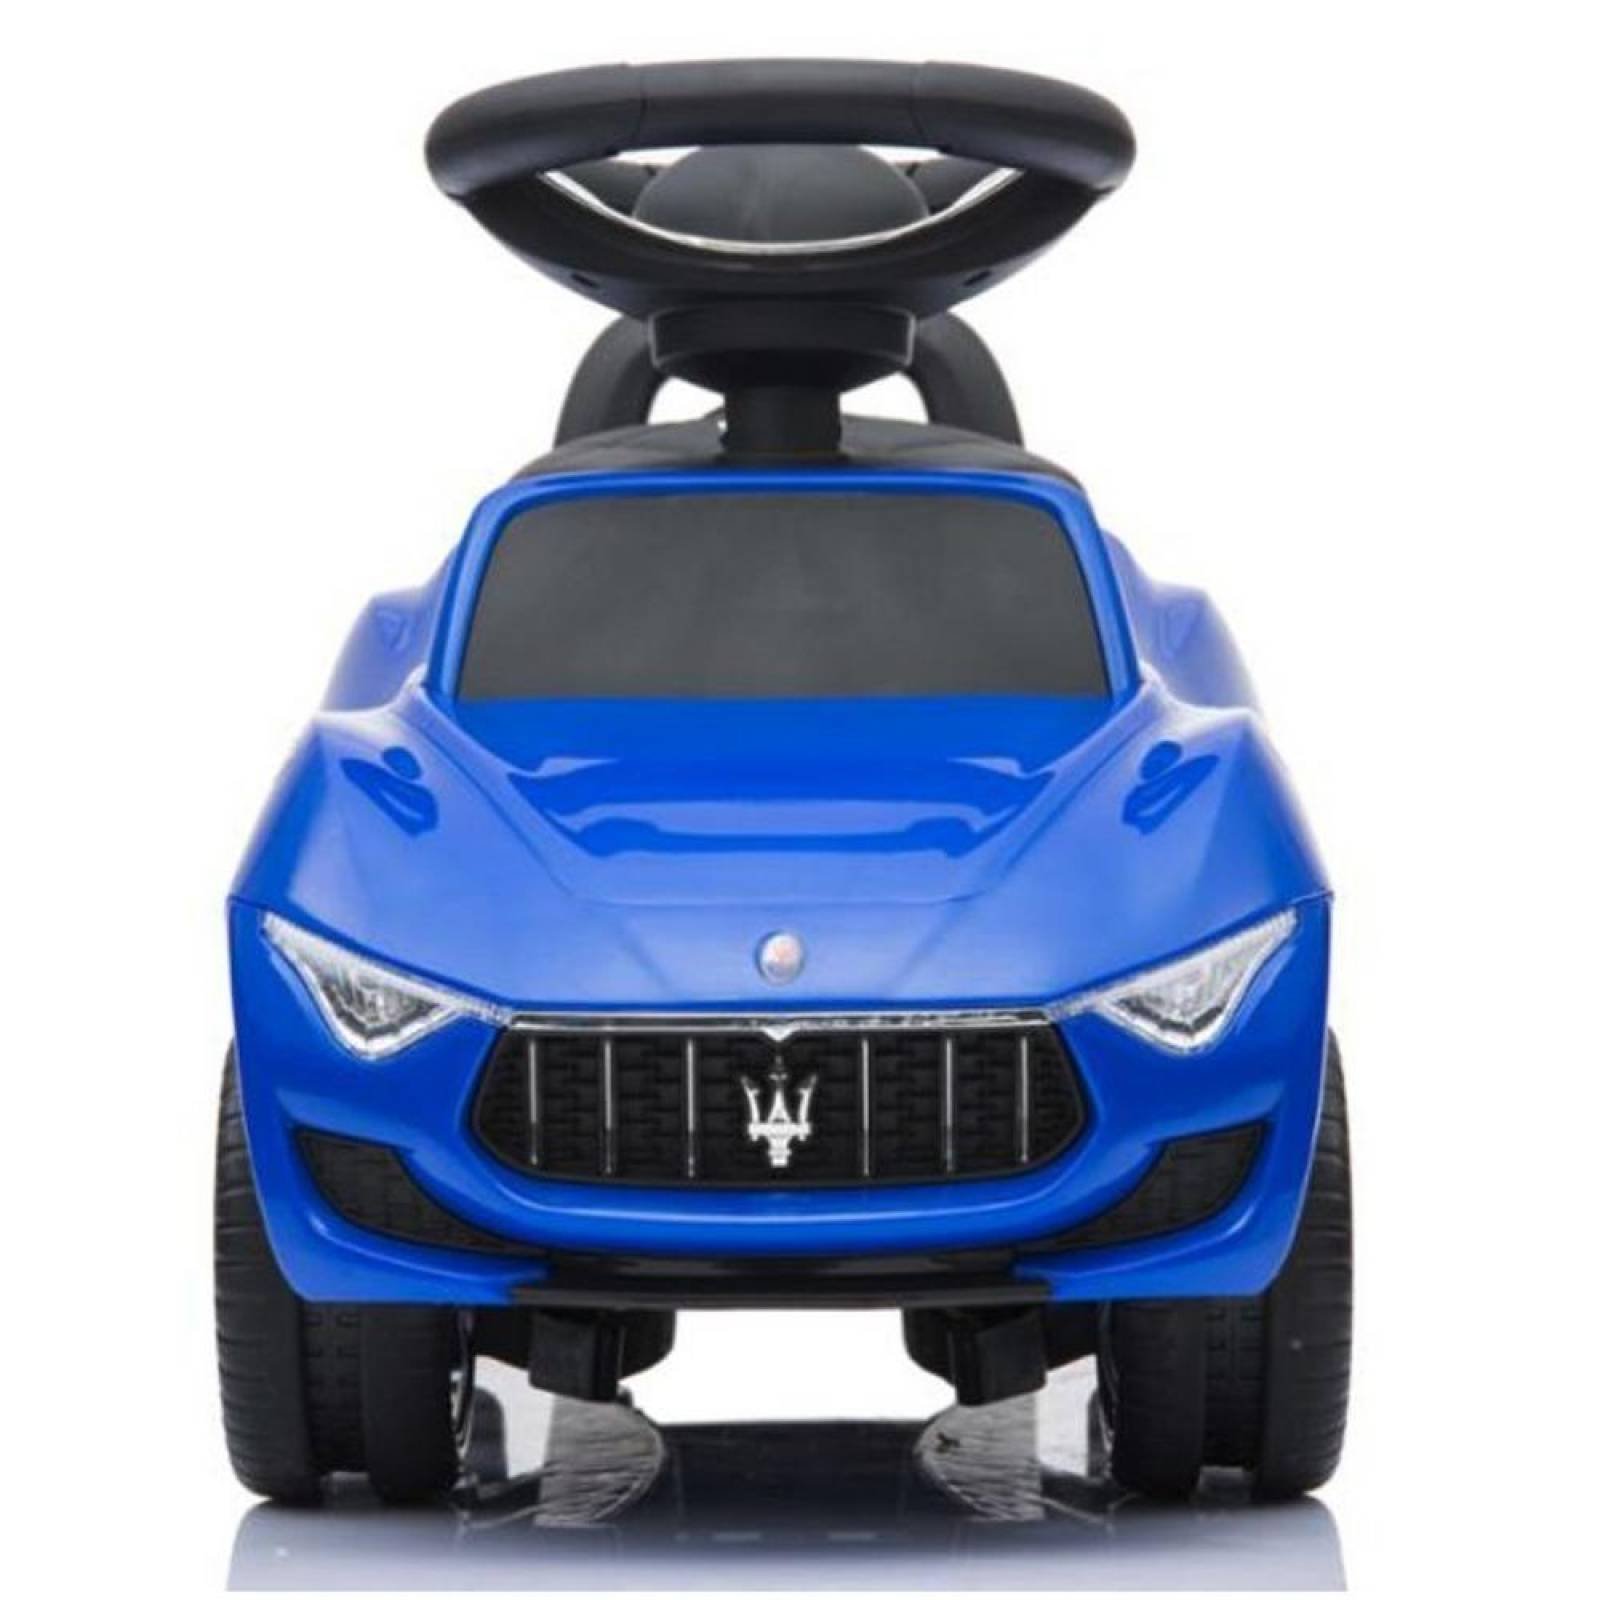 Maserati montable electrico push car Best Ride on Cars (CL) Azul